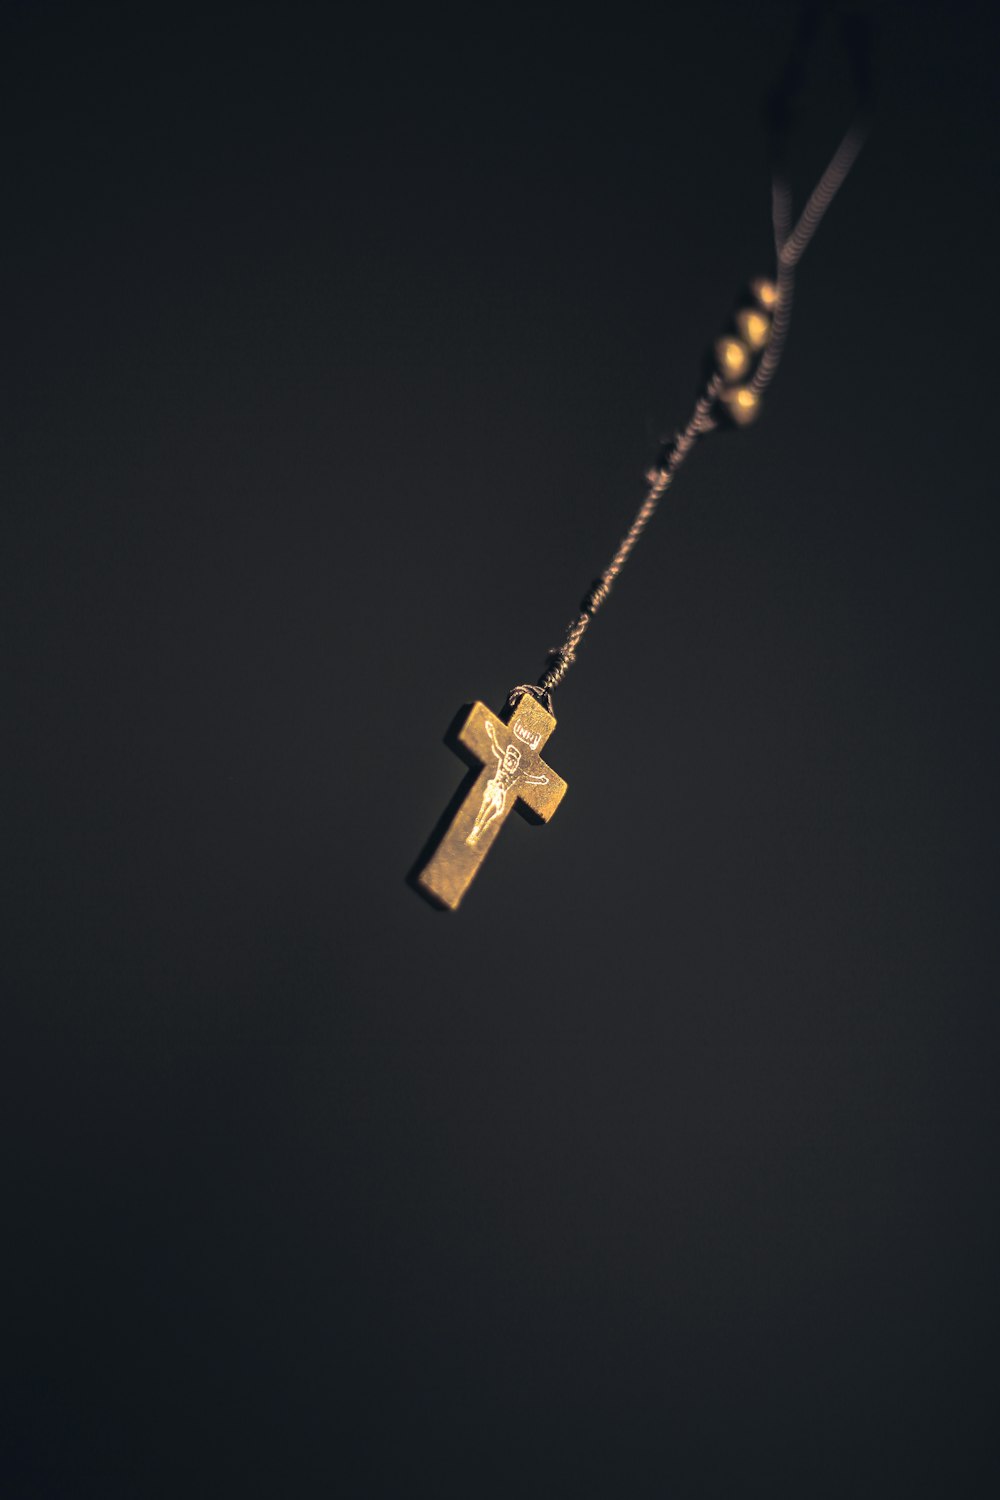 gold-colored cross pendant on black background